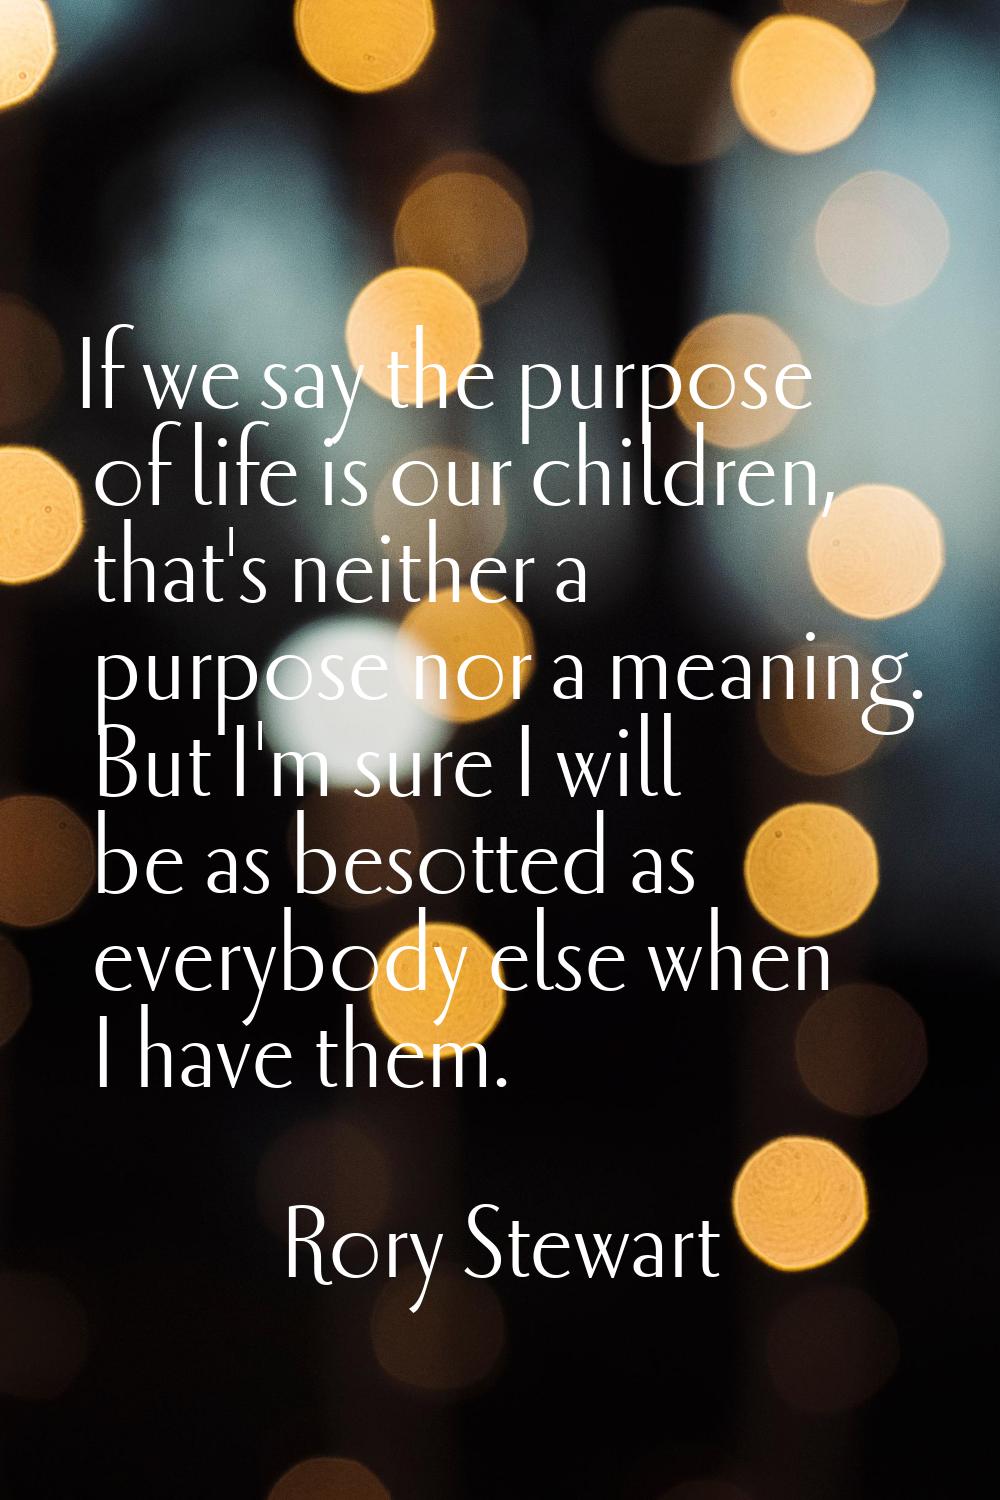 If we say the purpose of life is our children, that's neither a purpose nor a meaning. But I'm sure